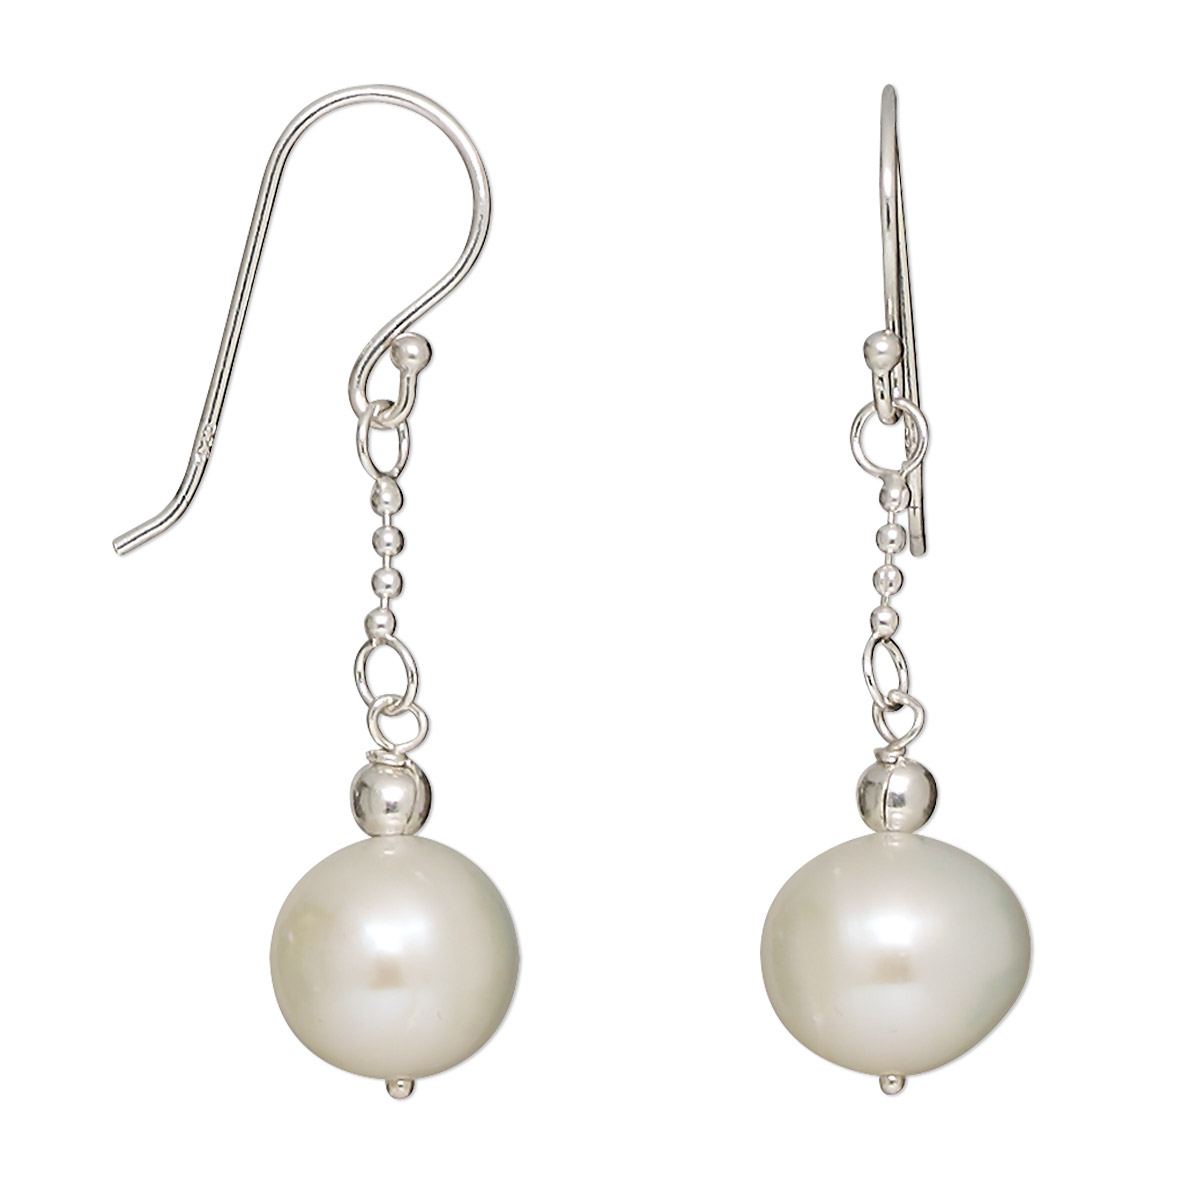 Earring, sterling silver and cultured freshwater pearl, white, 9mm ...